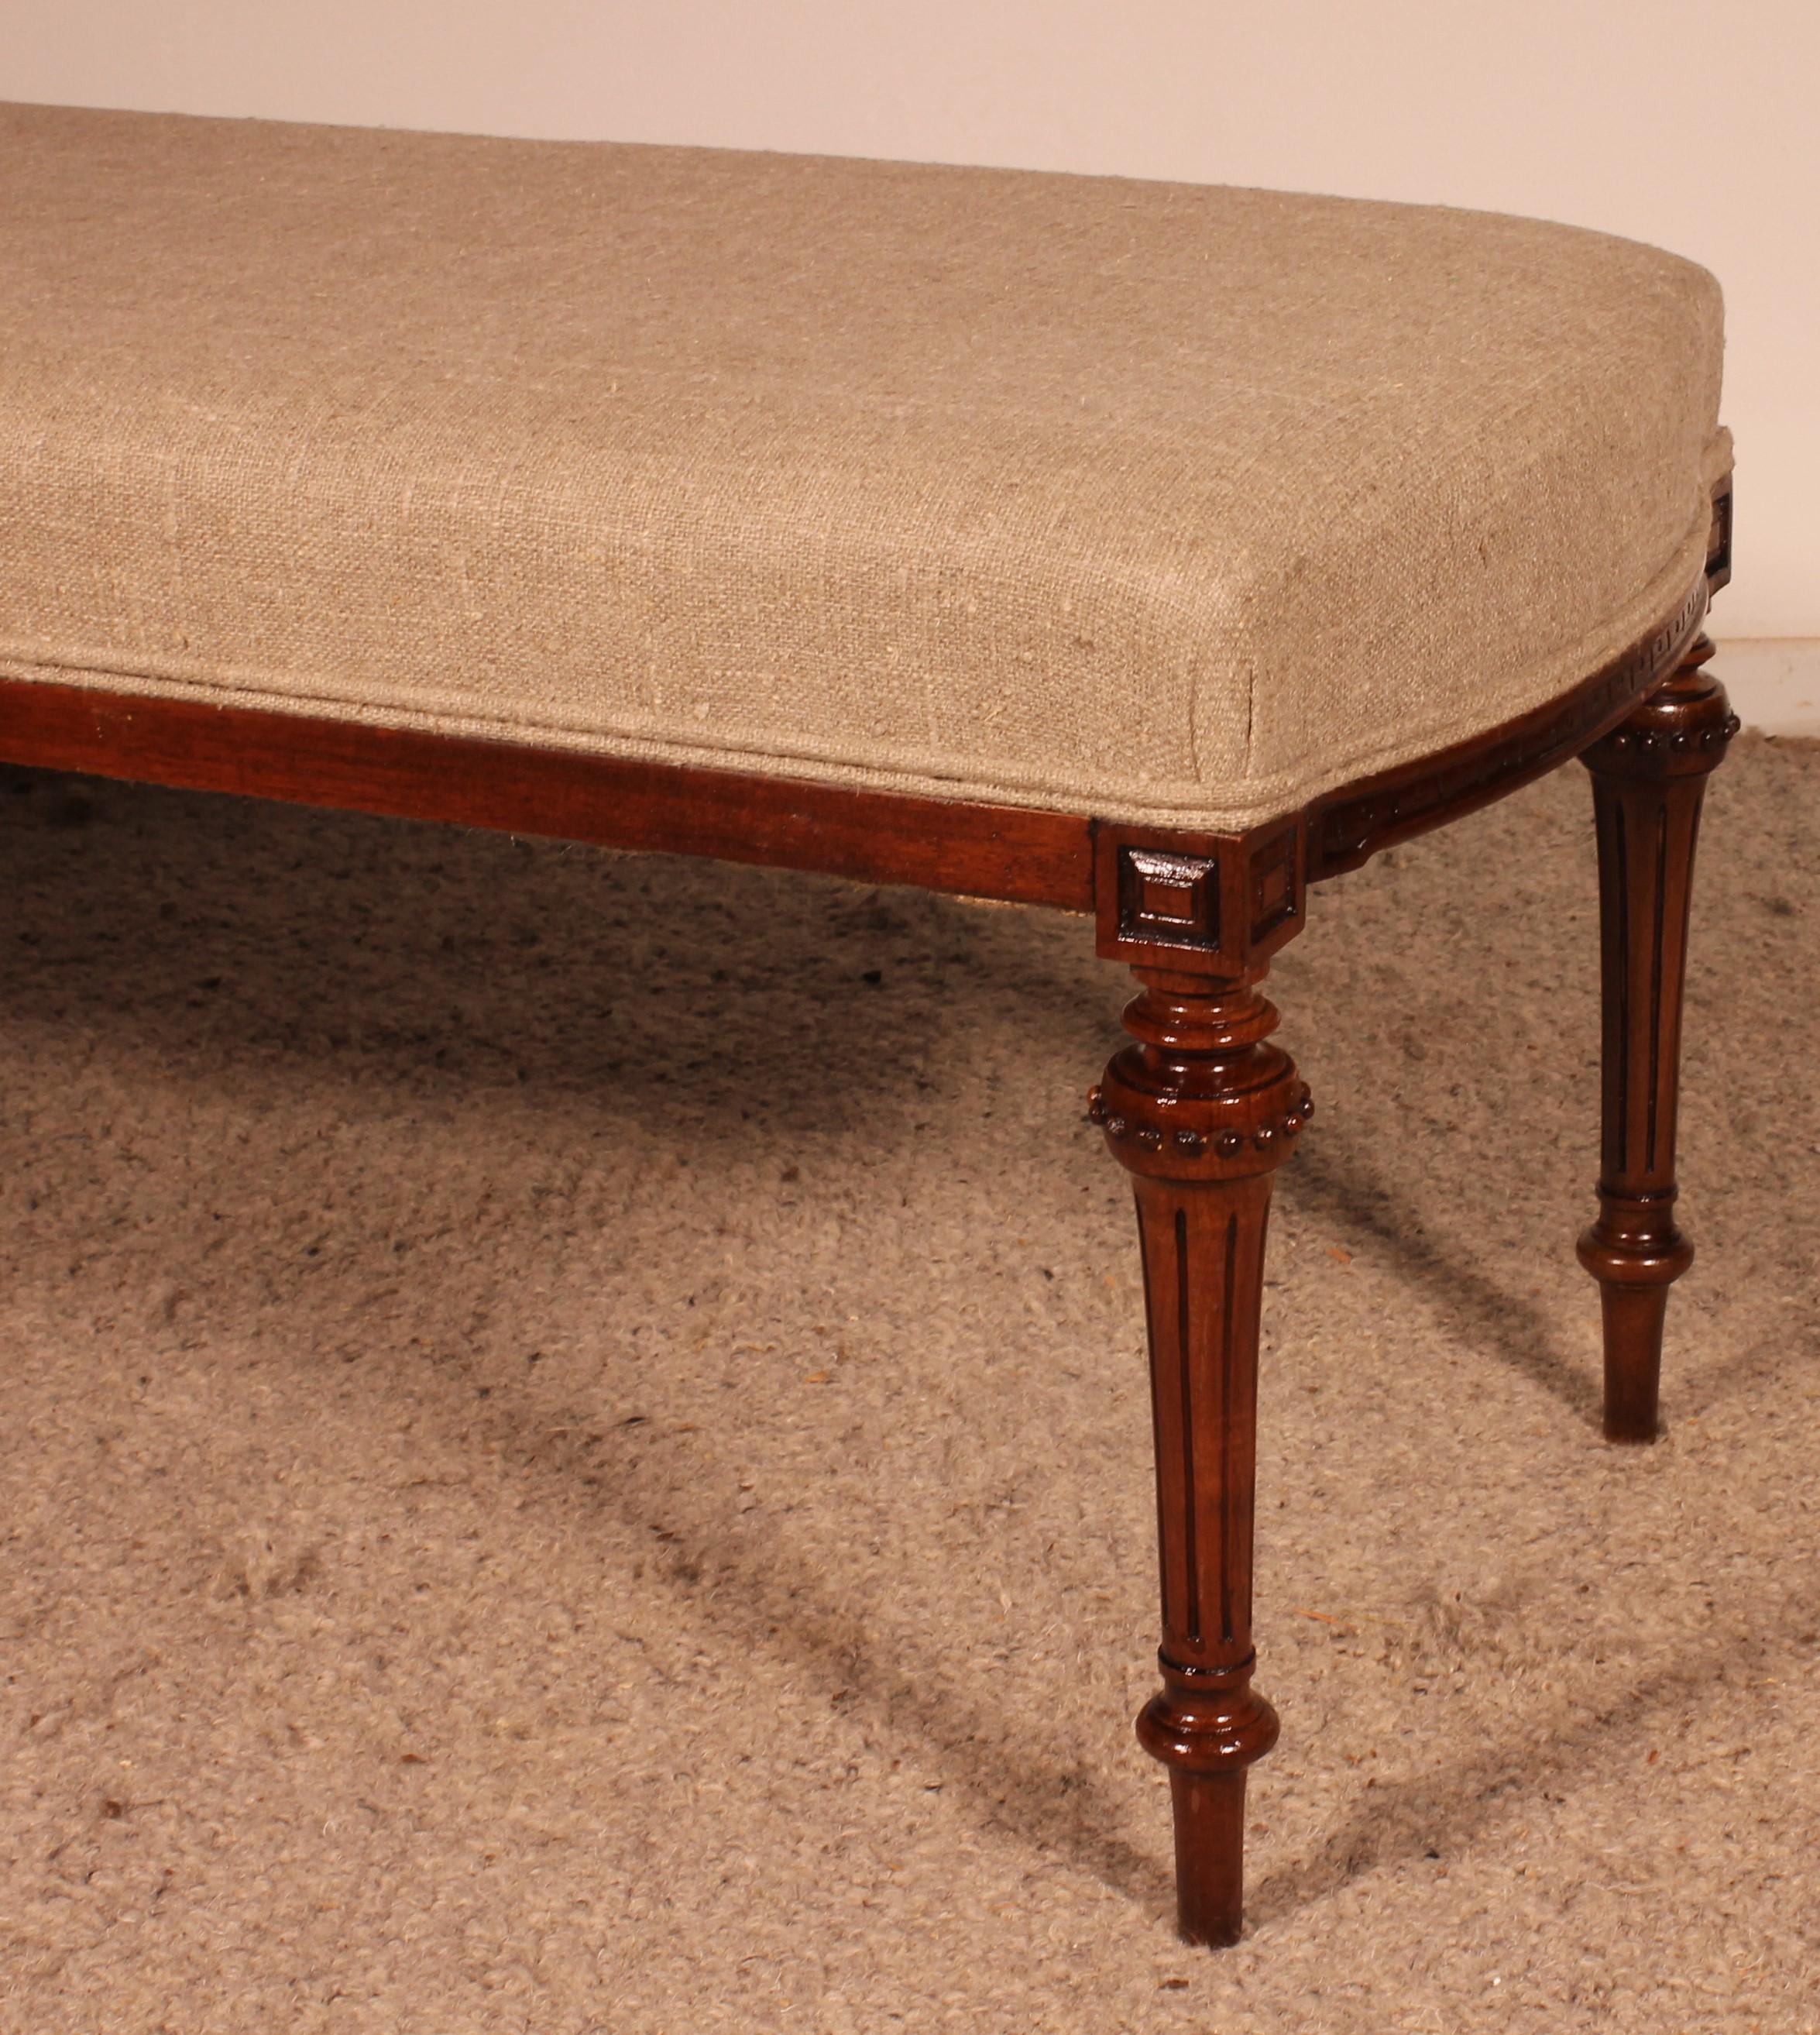 Mahogany Bench From The 19th Century Covered With A Linen Fabric In Good Condition For Sale In Brussels, Brussels